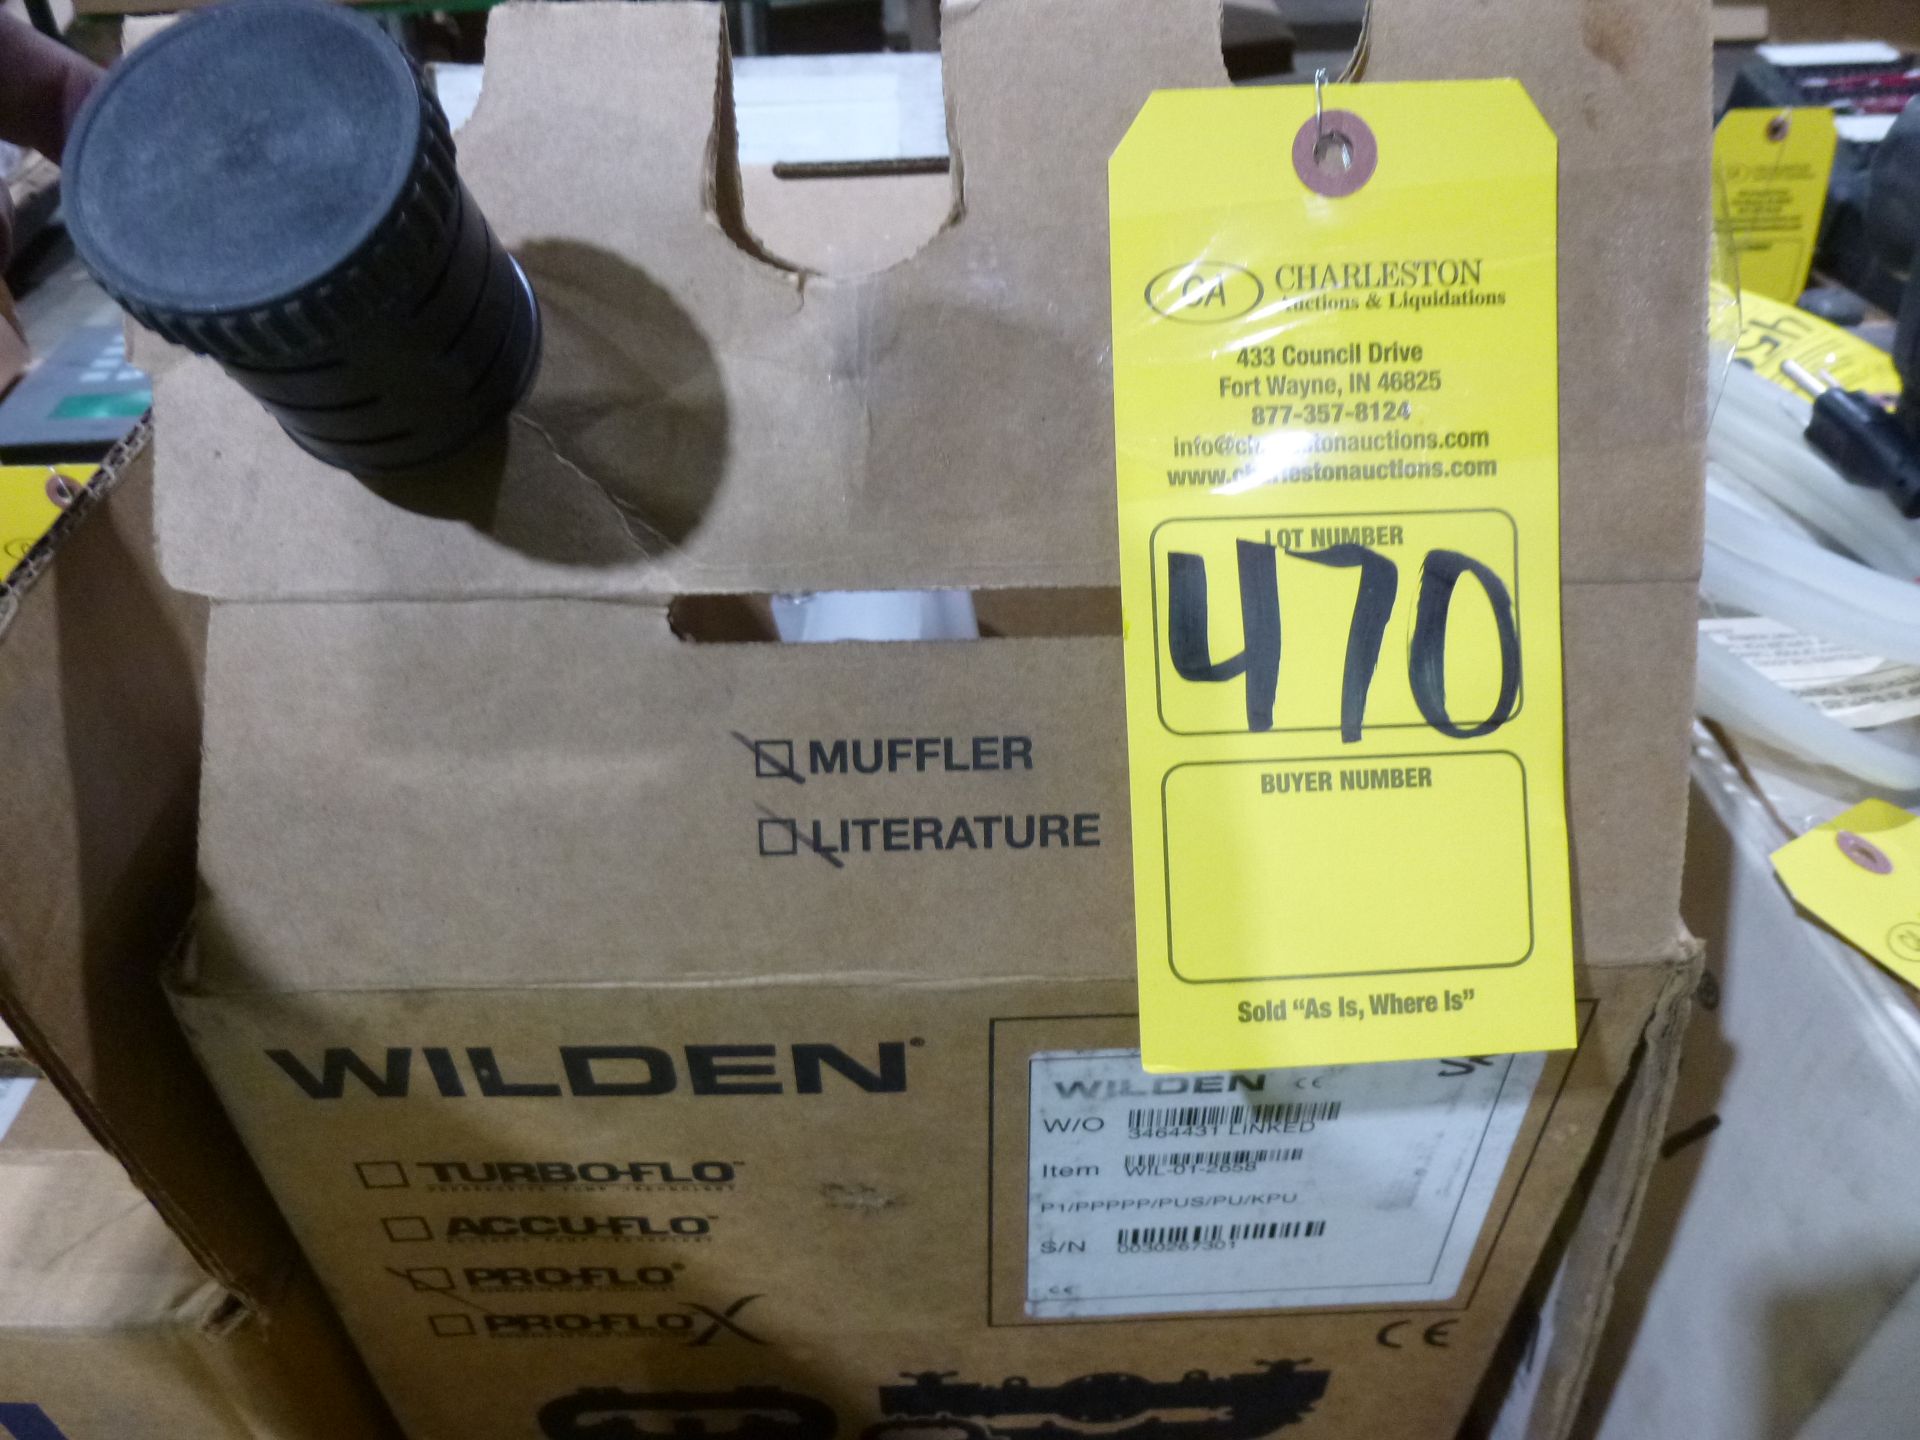 Wilden pump part number P1/PPPPP/PUS/PU/KPU, new in box, as always with Brolyn LLC auctions, all